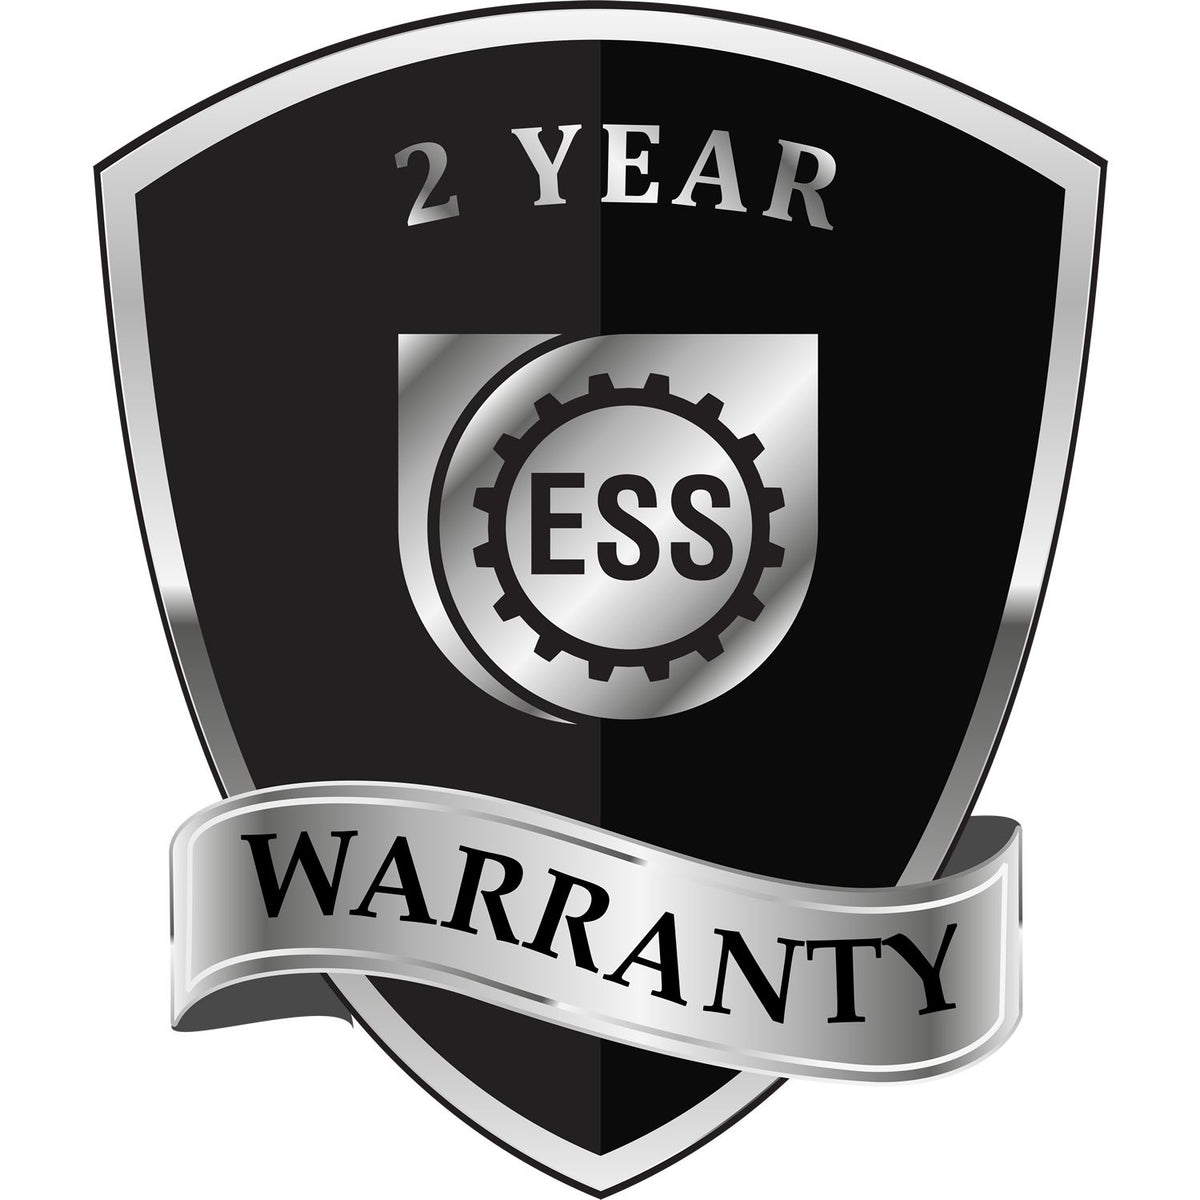 A badge or emblem showing a warranty icon for the Handheld Connecticut Land Surveyor Seal